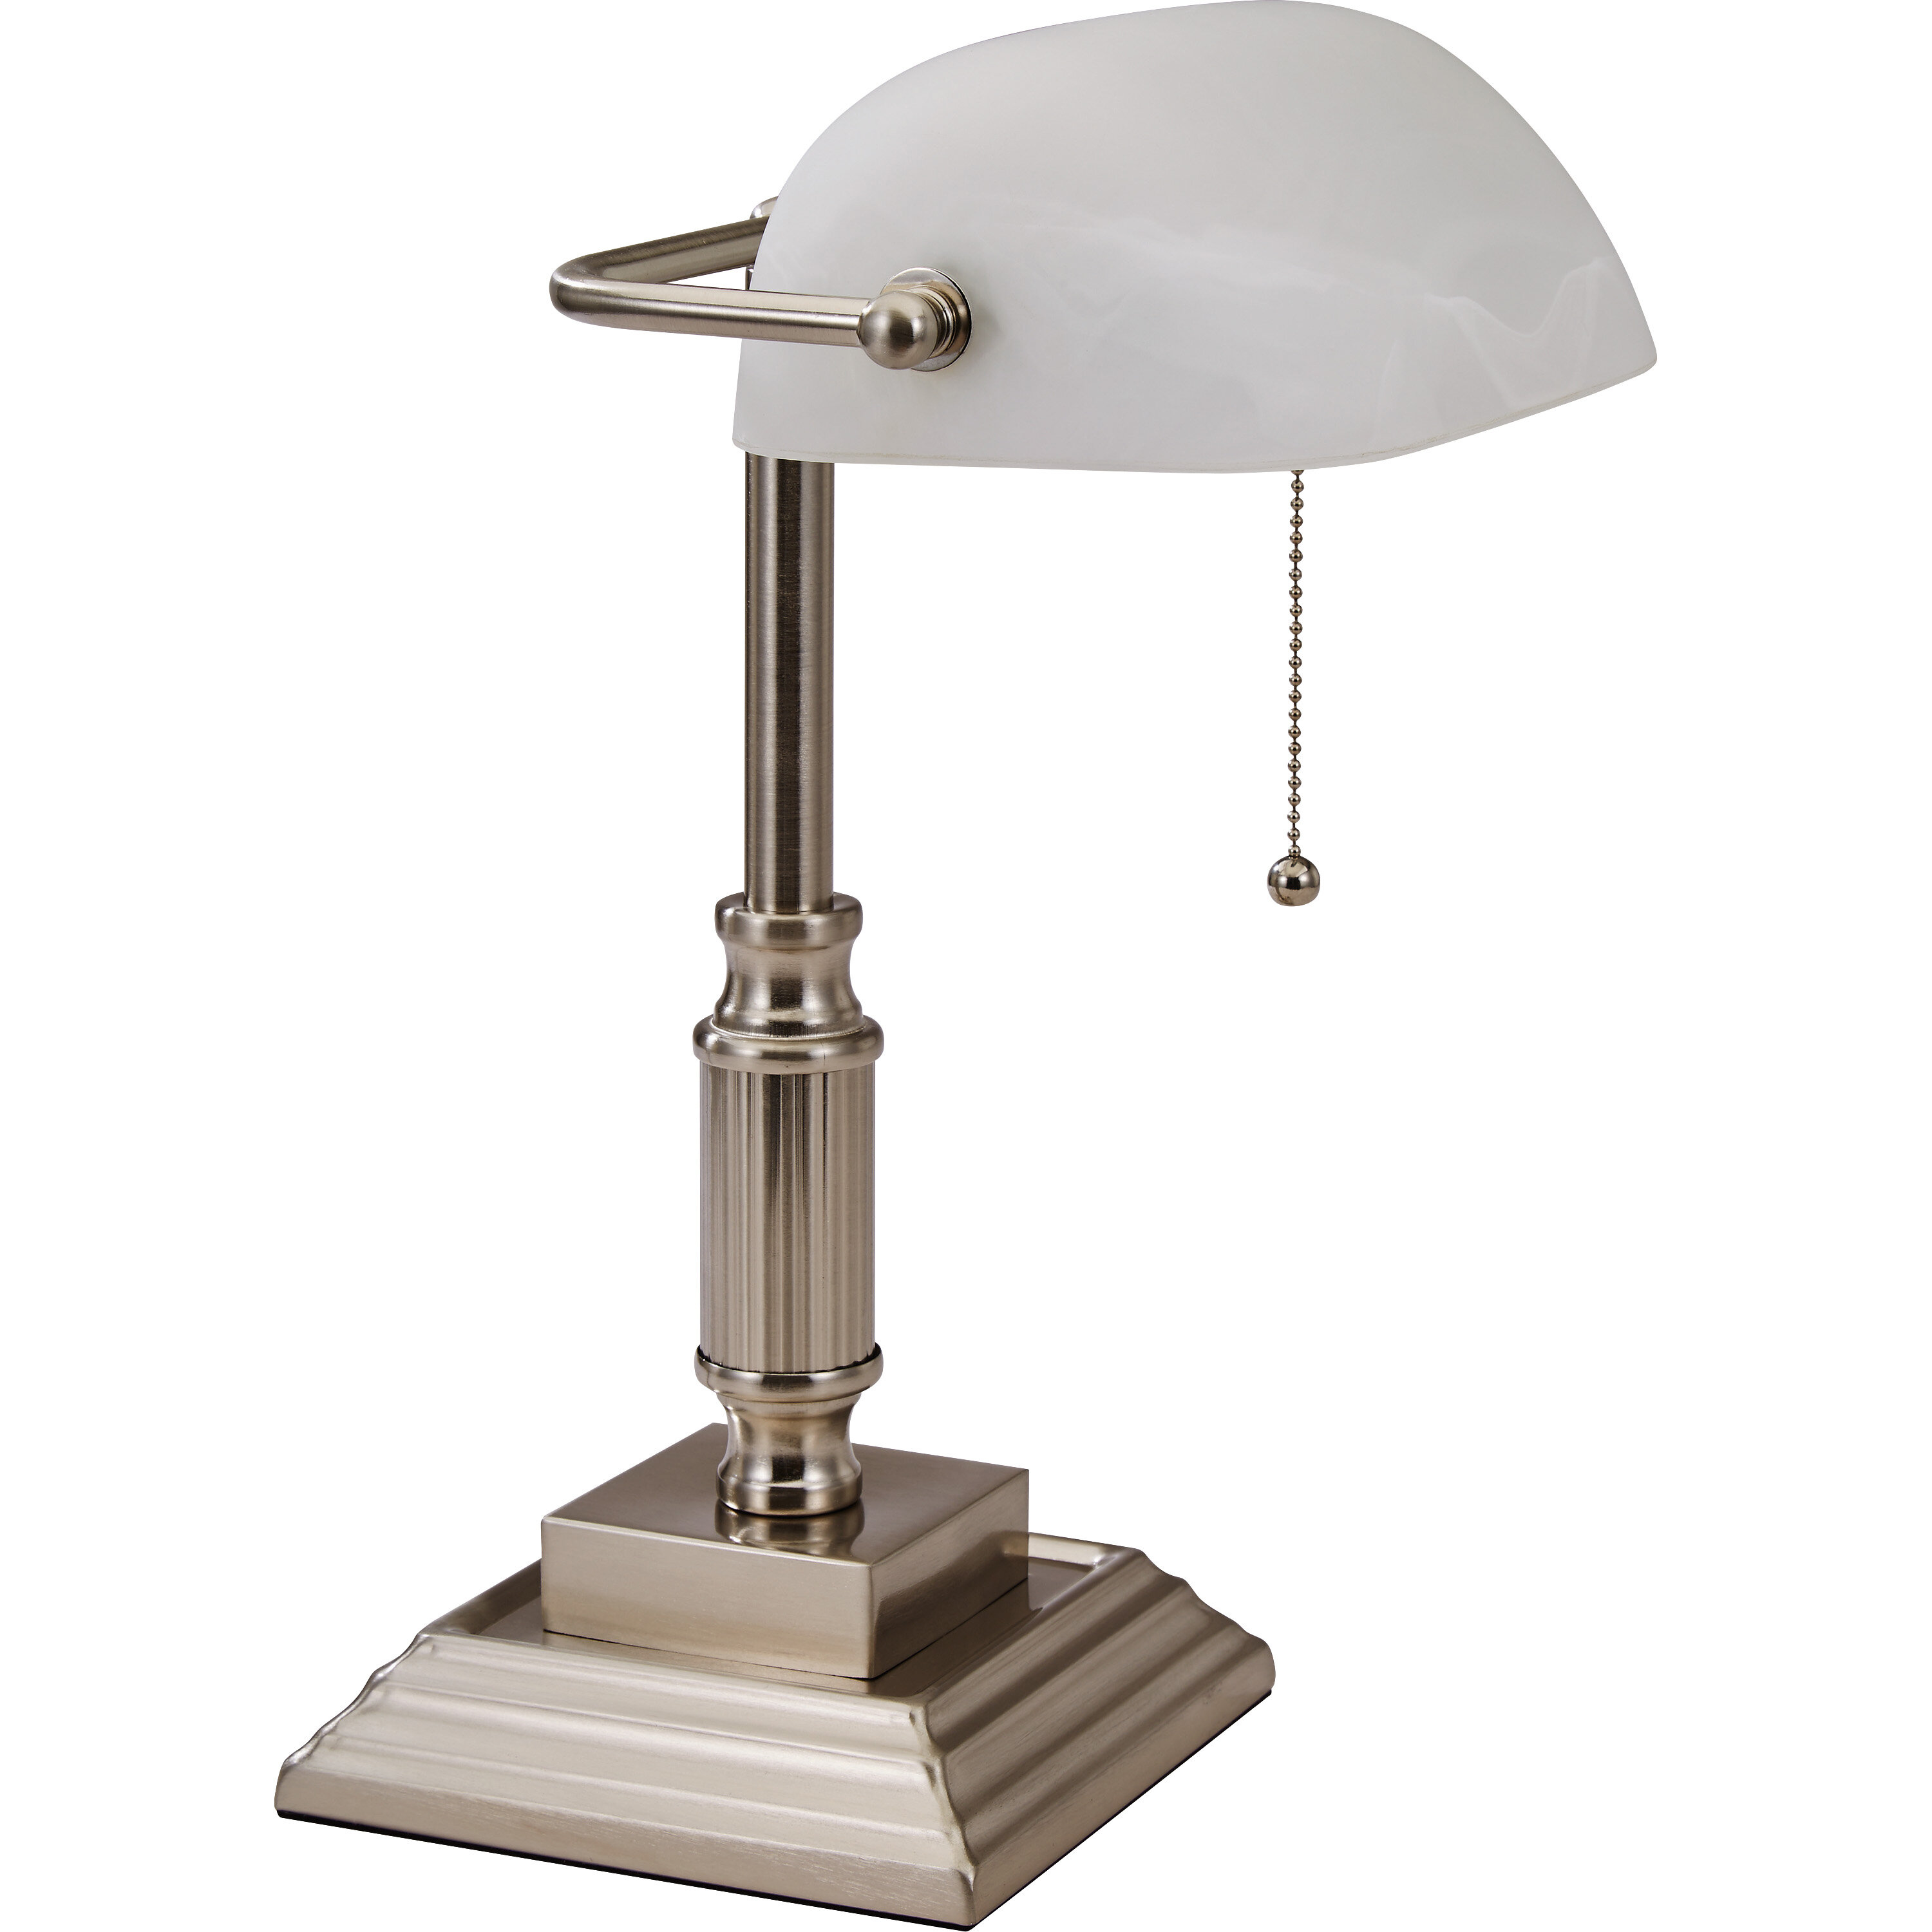 Buy Eglo Green/Brass Banker 1 Light Glass Table Lamp from the Next UK  online shop